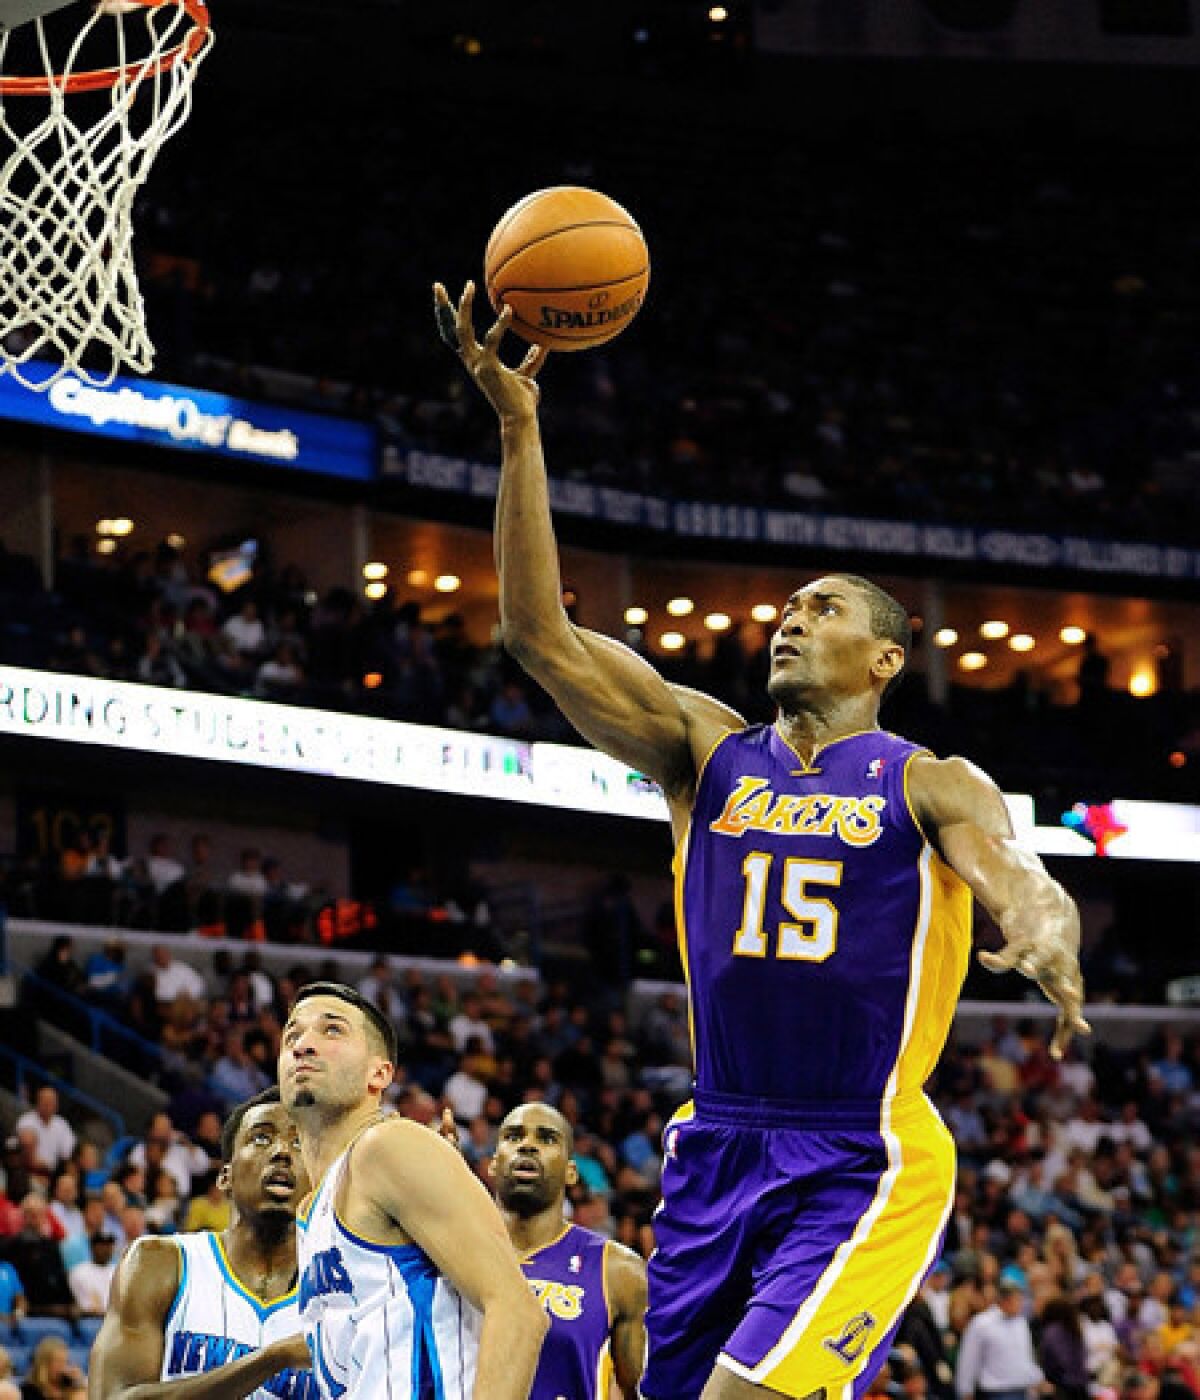 Lakers forward Metta World Peace drives past Hornets guard Greivis Vasquez for a layup Wednesday night in New Orleans.